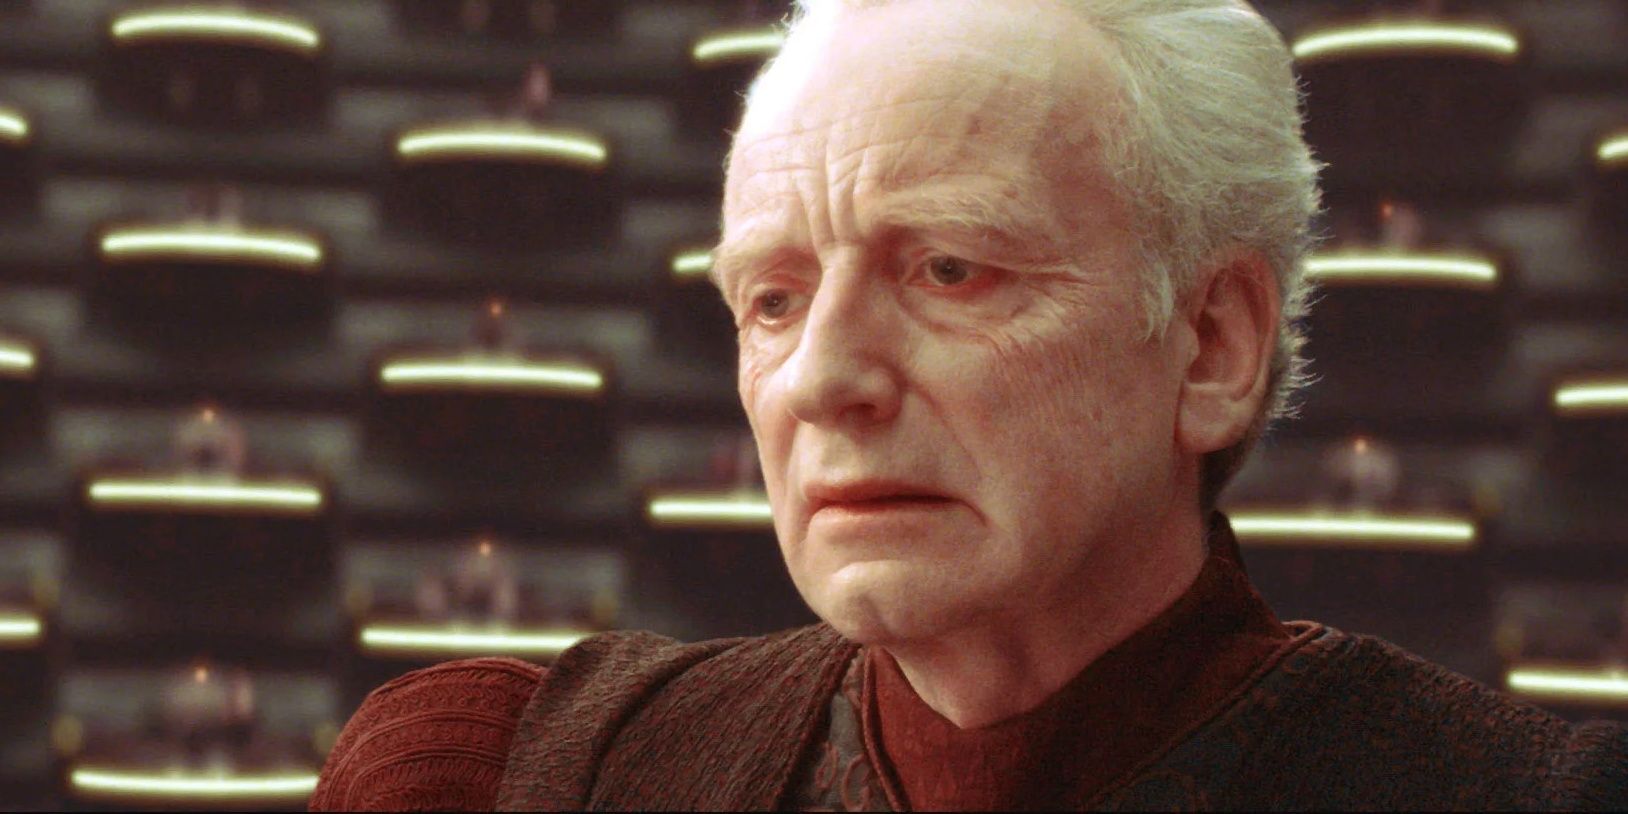 Emperor Palpatine of Star Wars faces the Senate